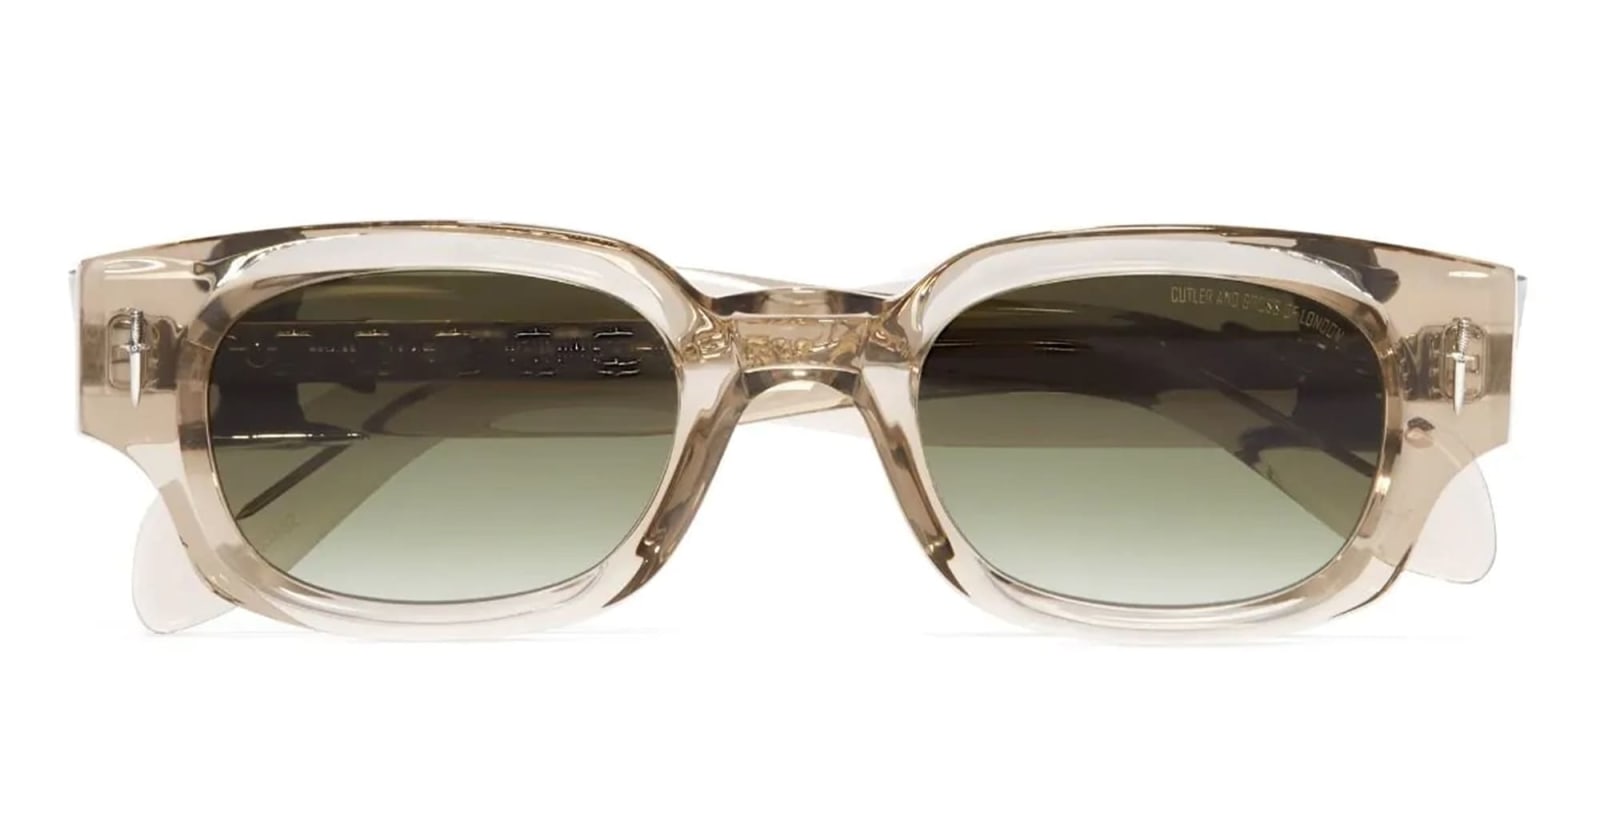 The Great Frog - Soaring Eagle / Sand Crystal Sunglasses